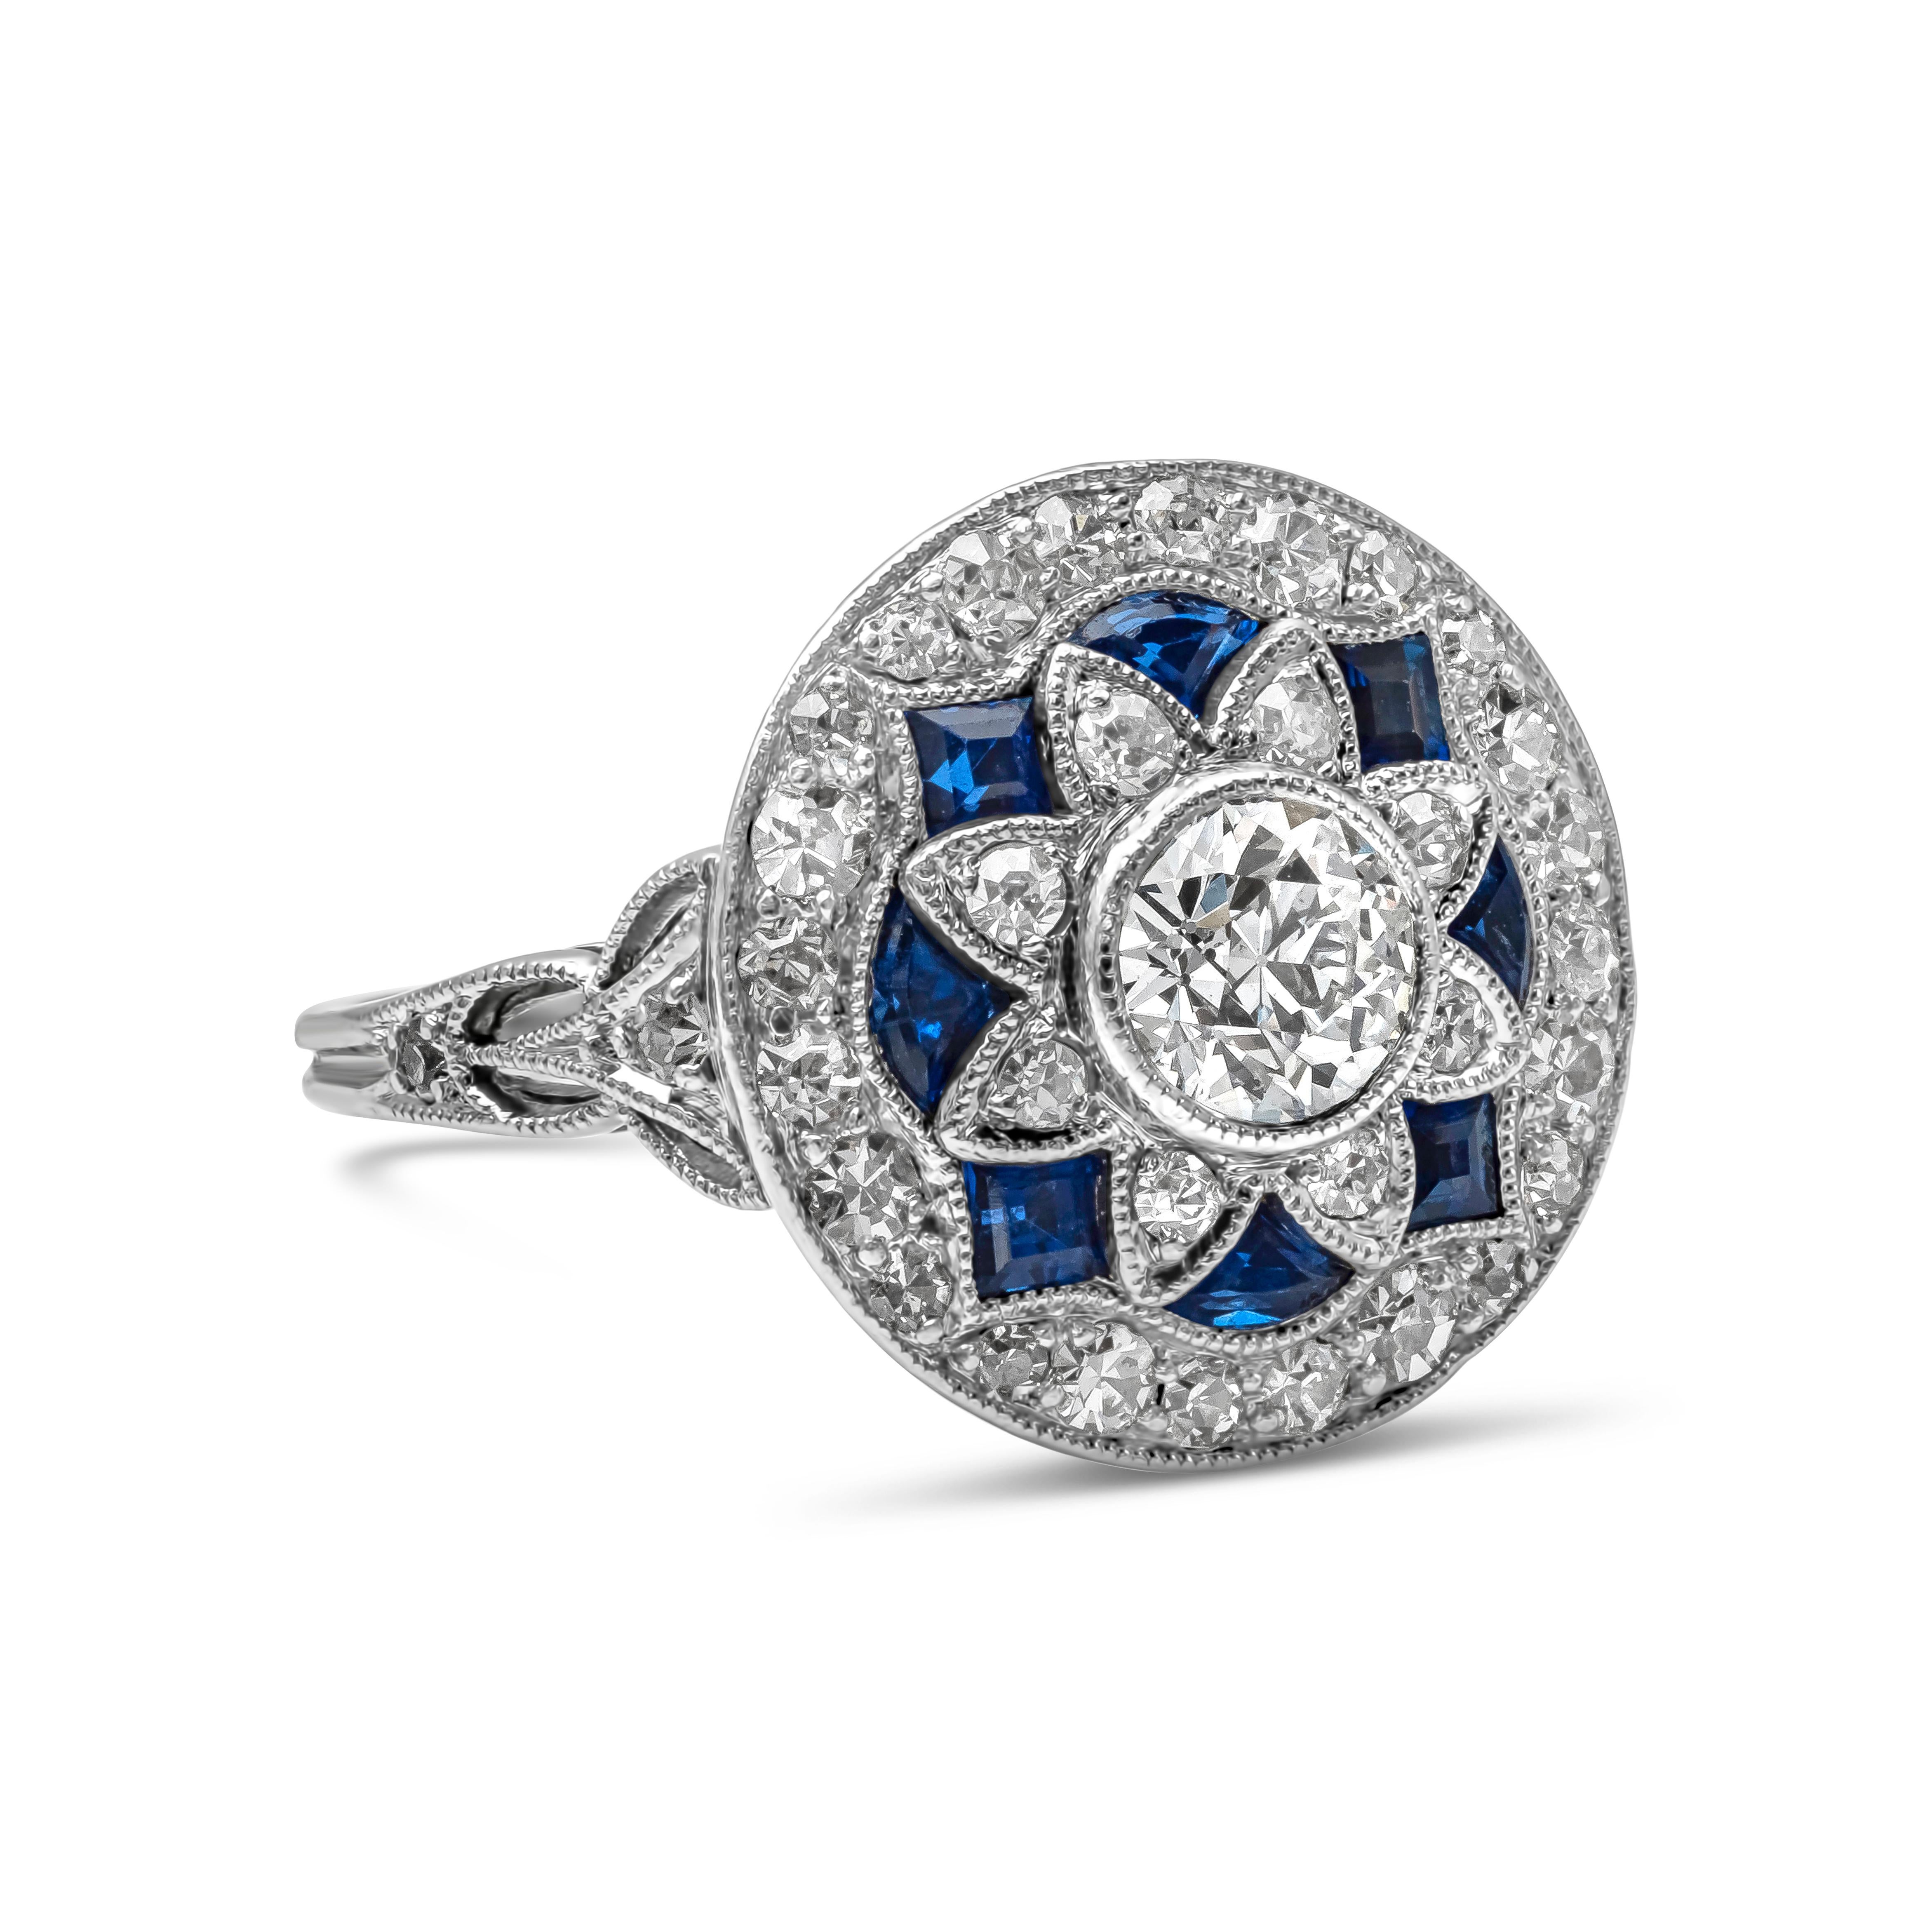 Showcasing a 0.45 carat old European cut diamond, set in an antique and intricately-designed mounting accented by sapphire and diamonds. Accent sapphires weigh 0.32 carats total; diamonds weigh 0.35 carats total. Made in platinum.